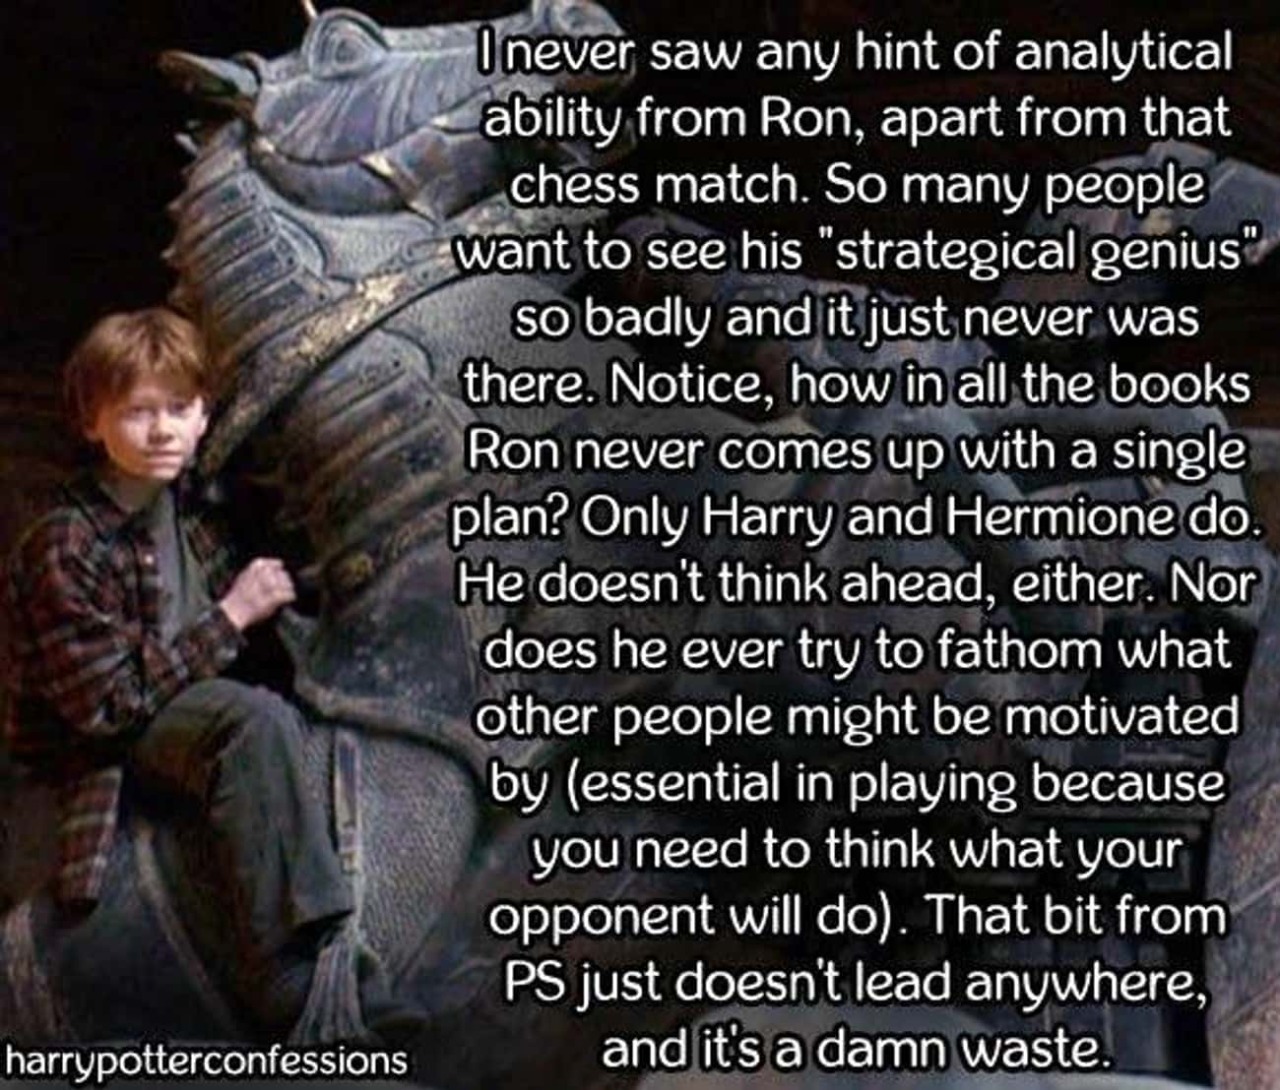 Source: Harry Potter Confessions On Tumblr